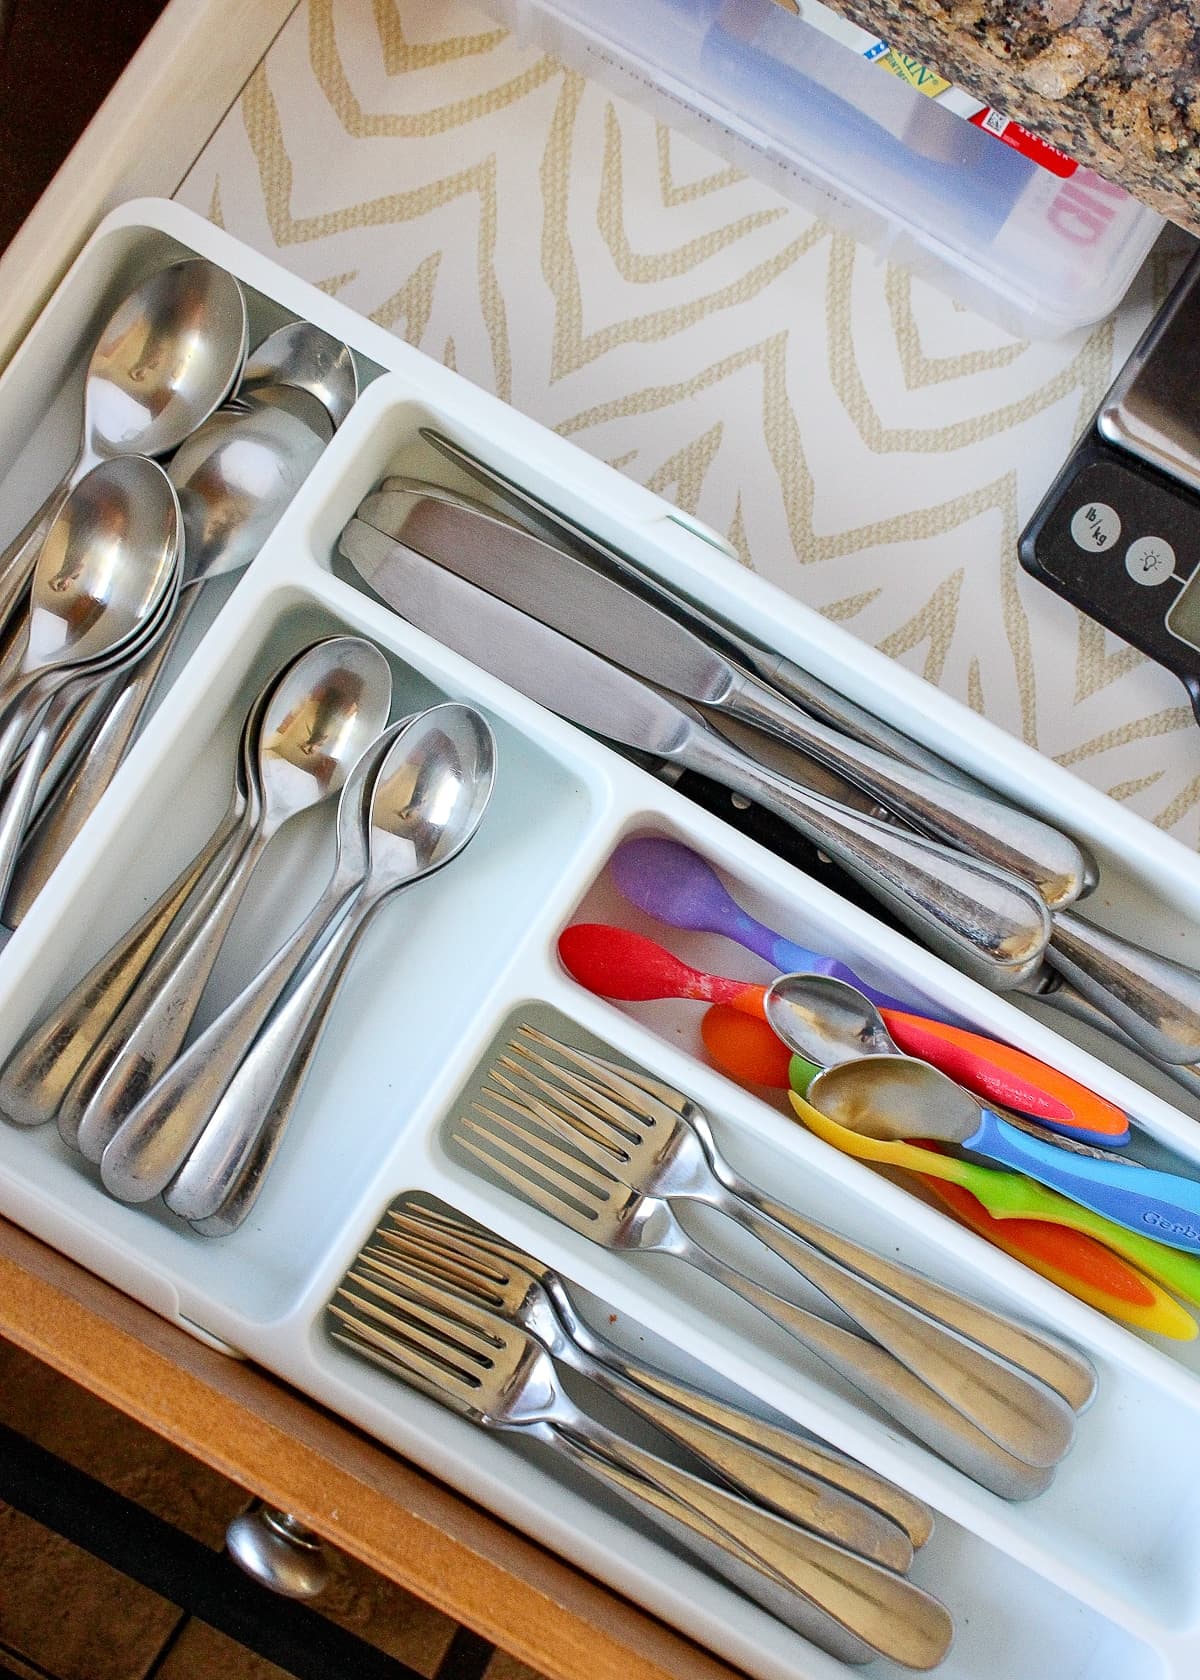 5 Types Of Kitchen Drawer Organizers & How To Use Them - Organized-ish